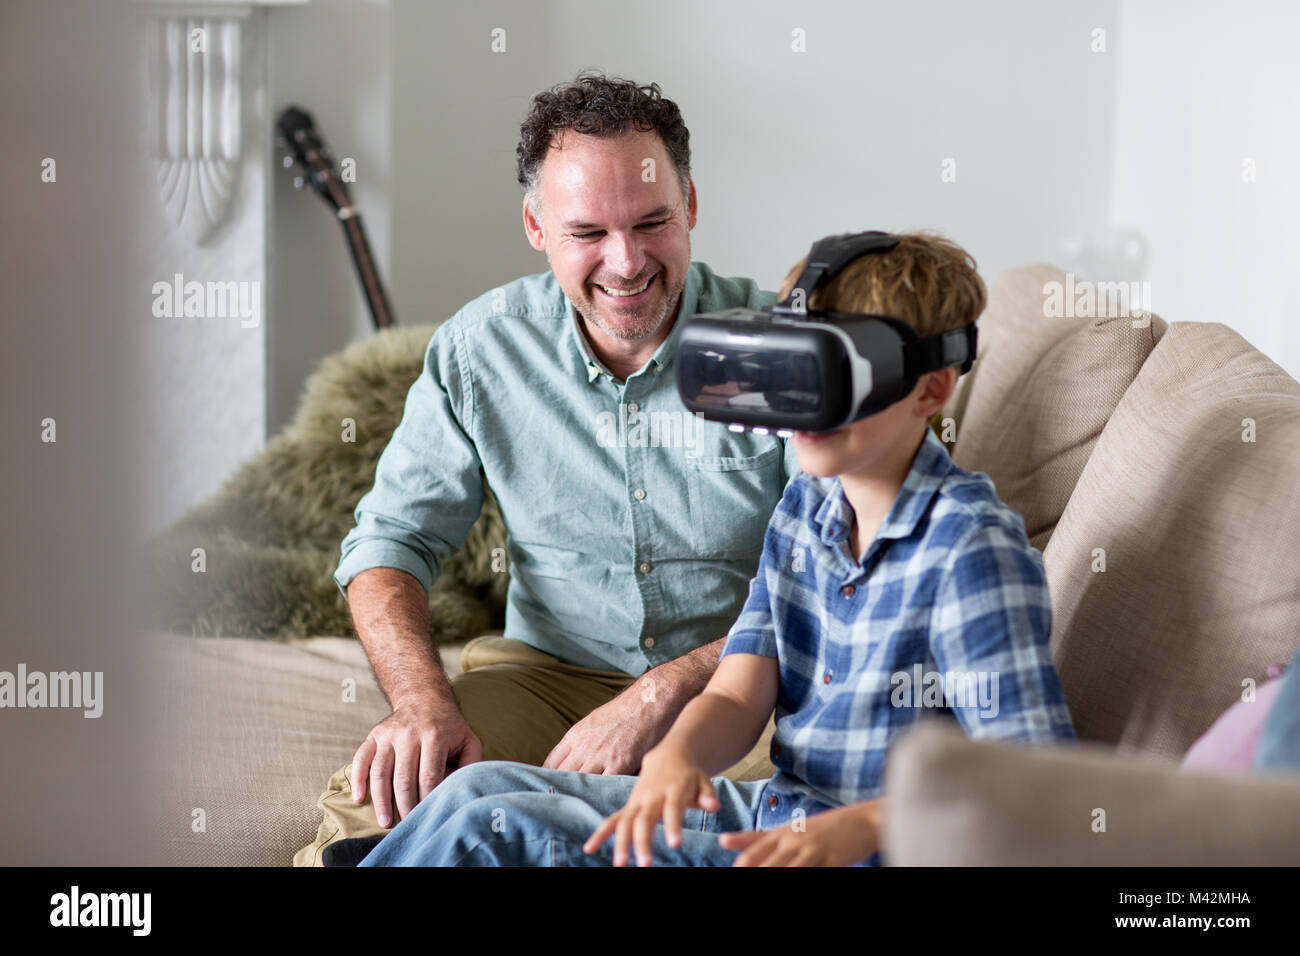 Boy using a VR headset game at home Stock Photo